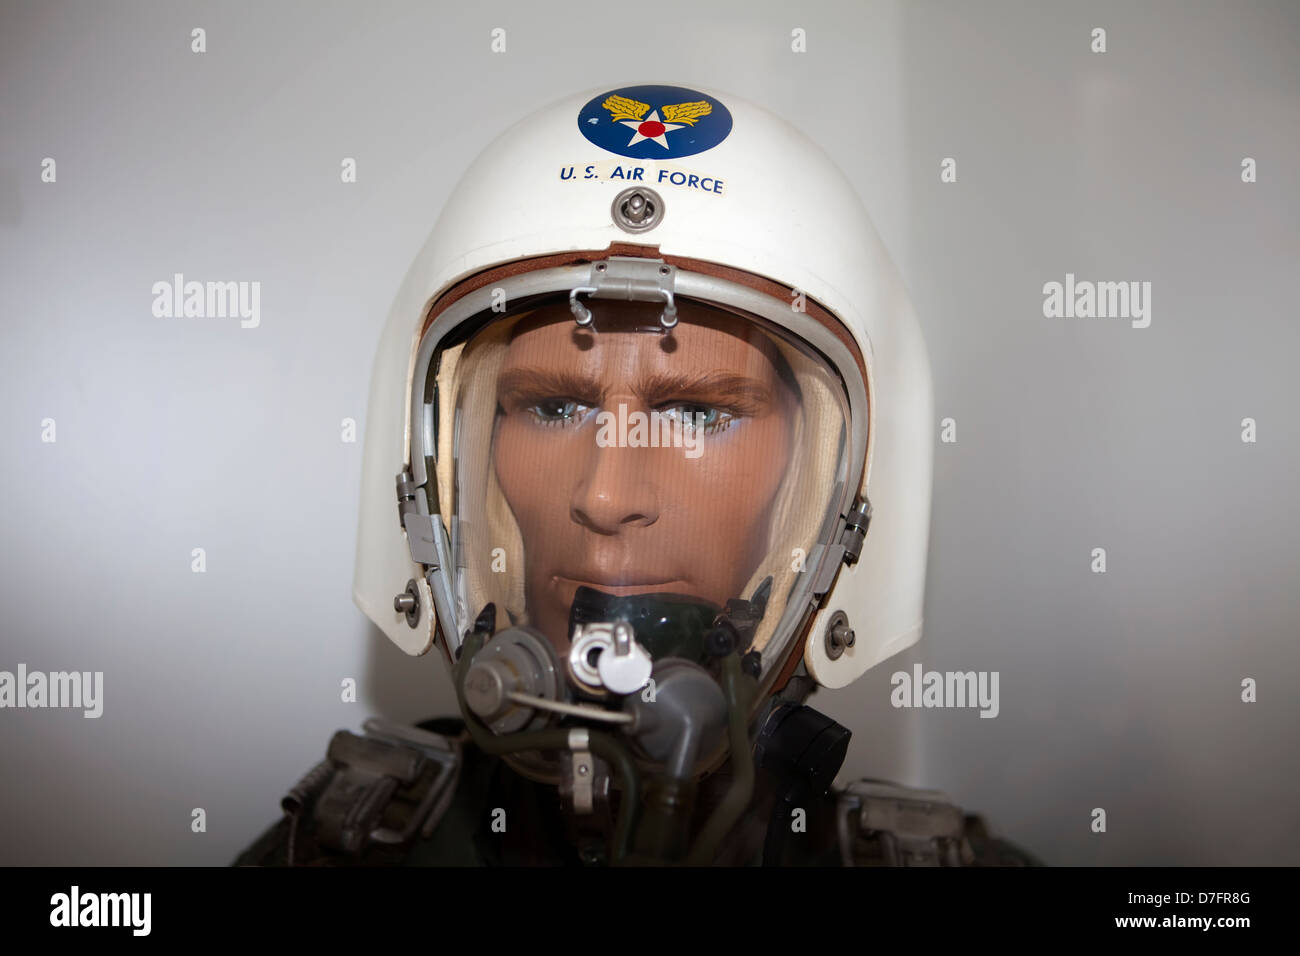 Model of a Fighter Pilot with a pressure suit, US Air Force, Aircraft Collection near Hermeskeil, Rhineland-Palatinate, Germany, Stock Photo